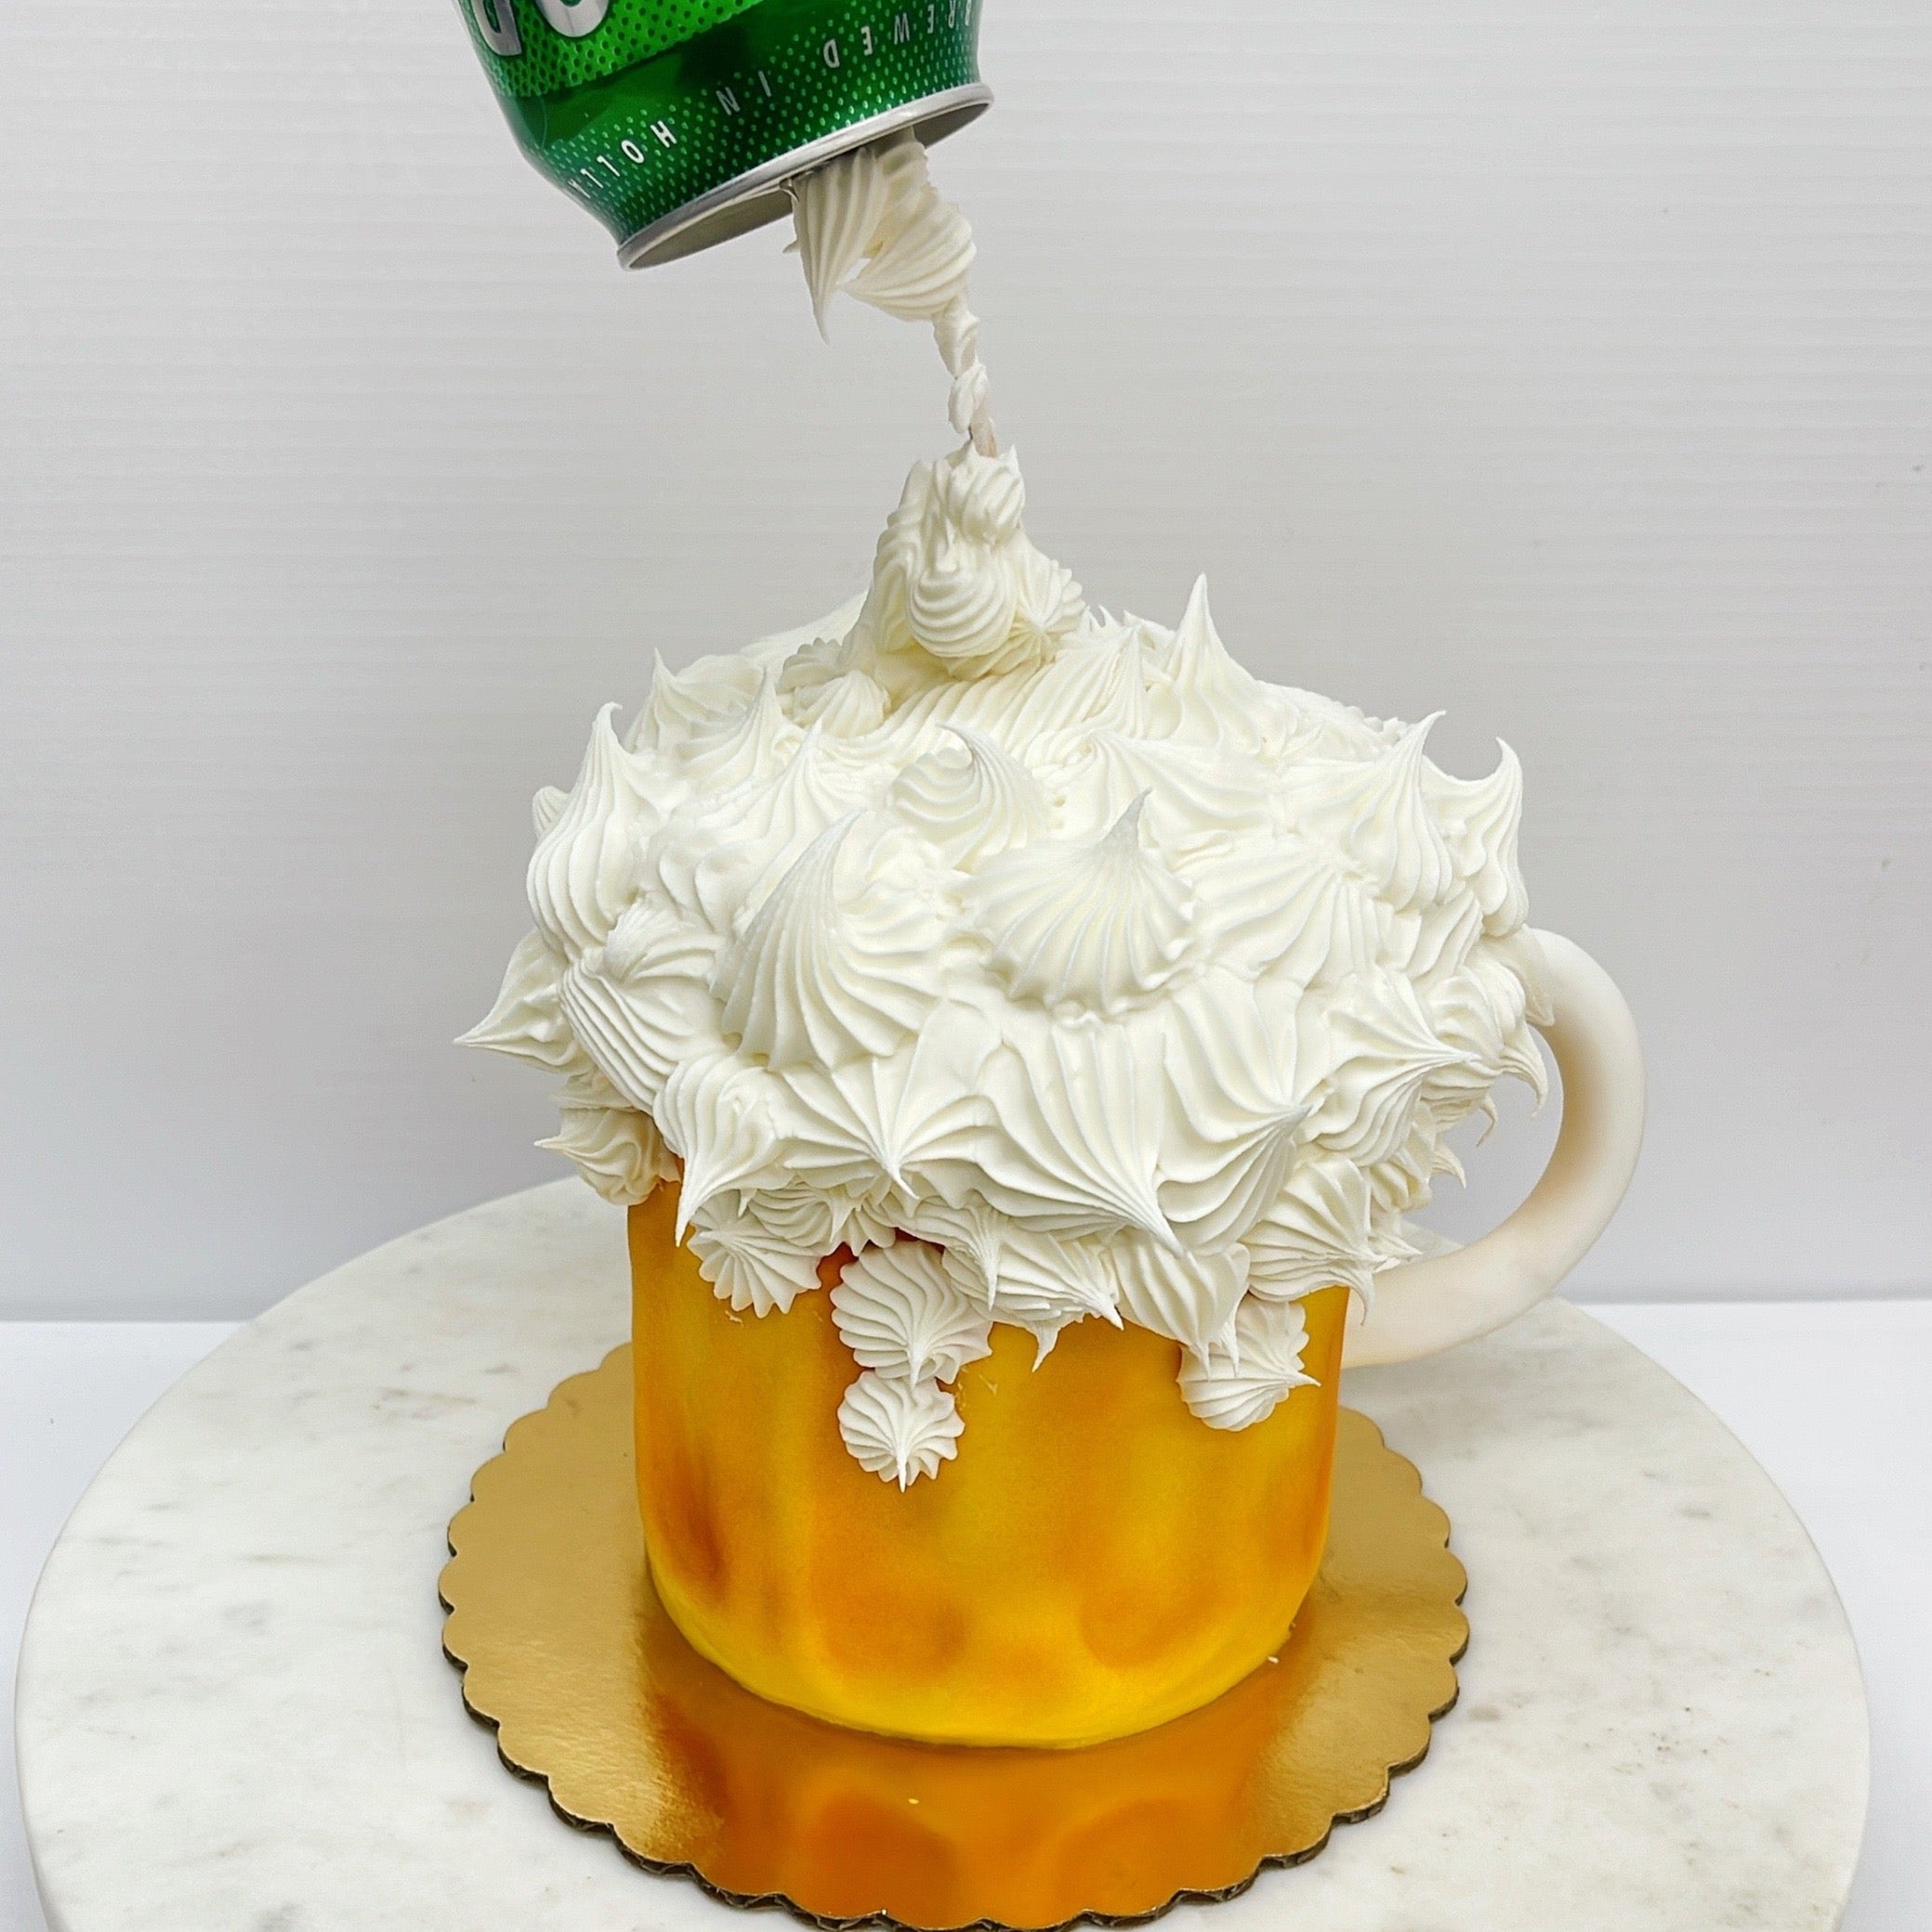 How To Make A Beer Glass Cake With Pouring Bottle